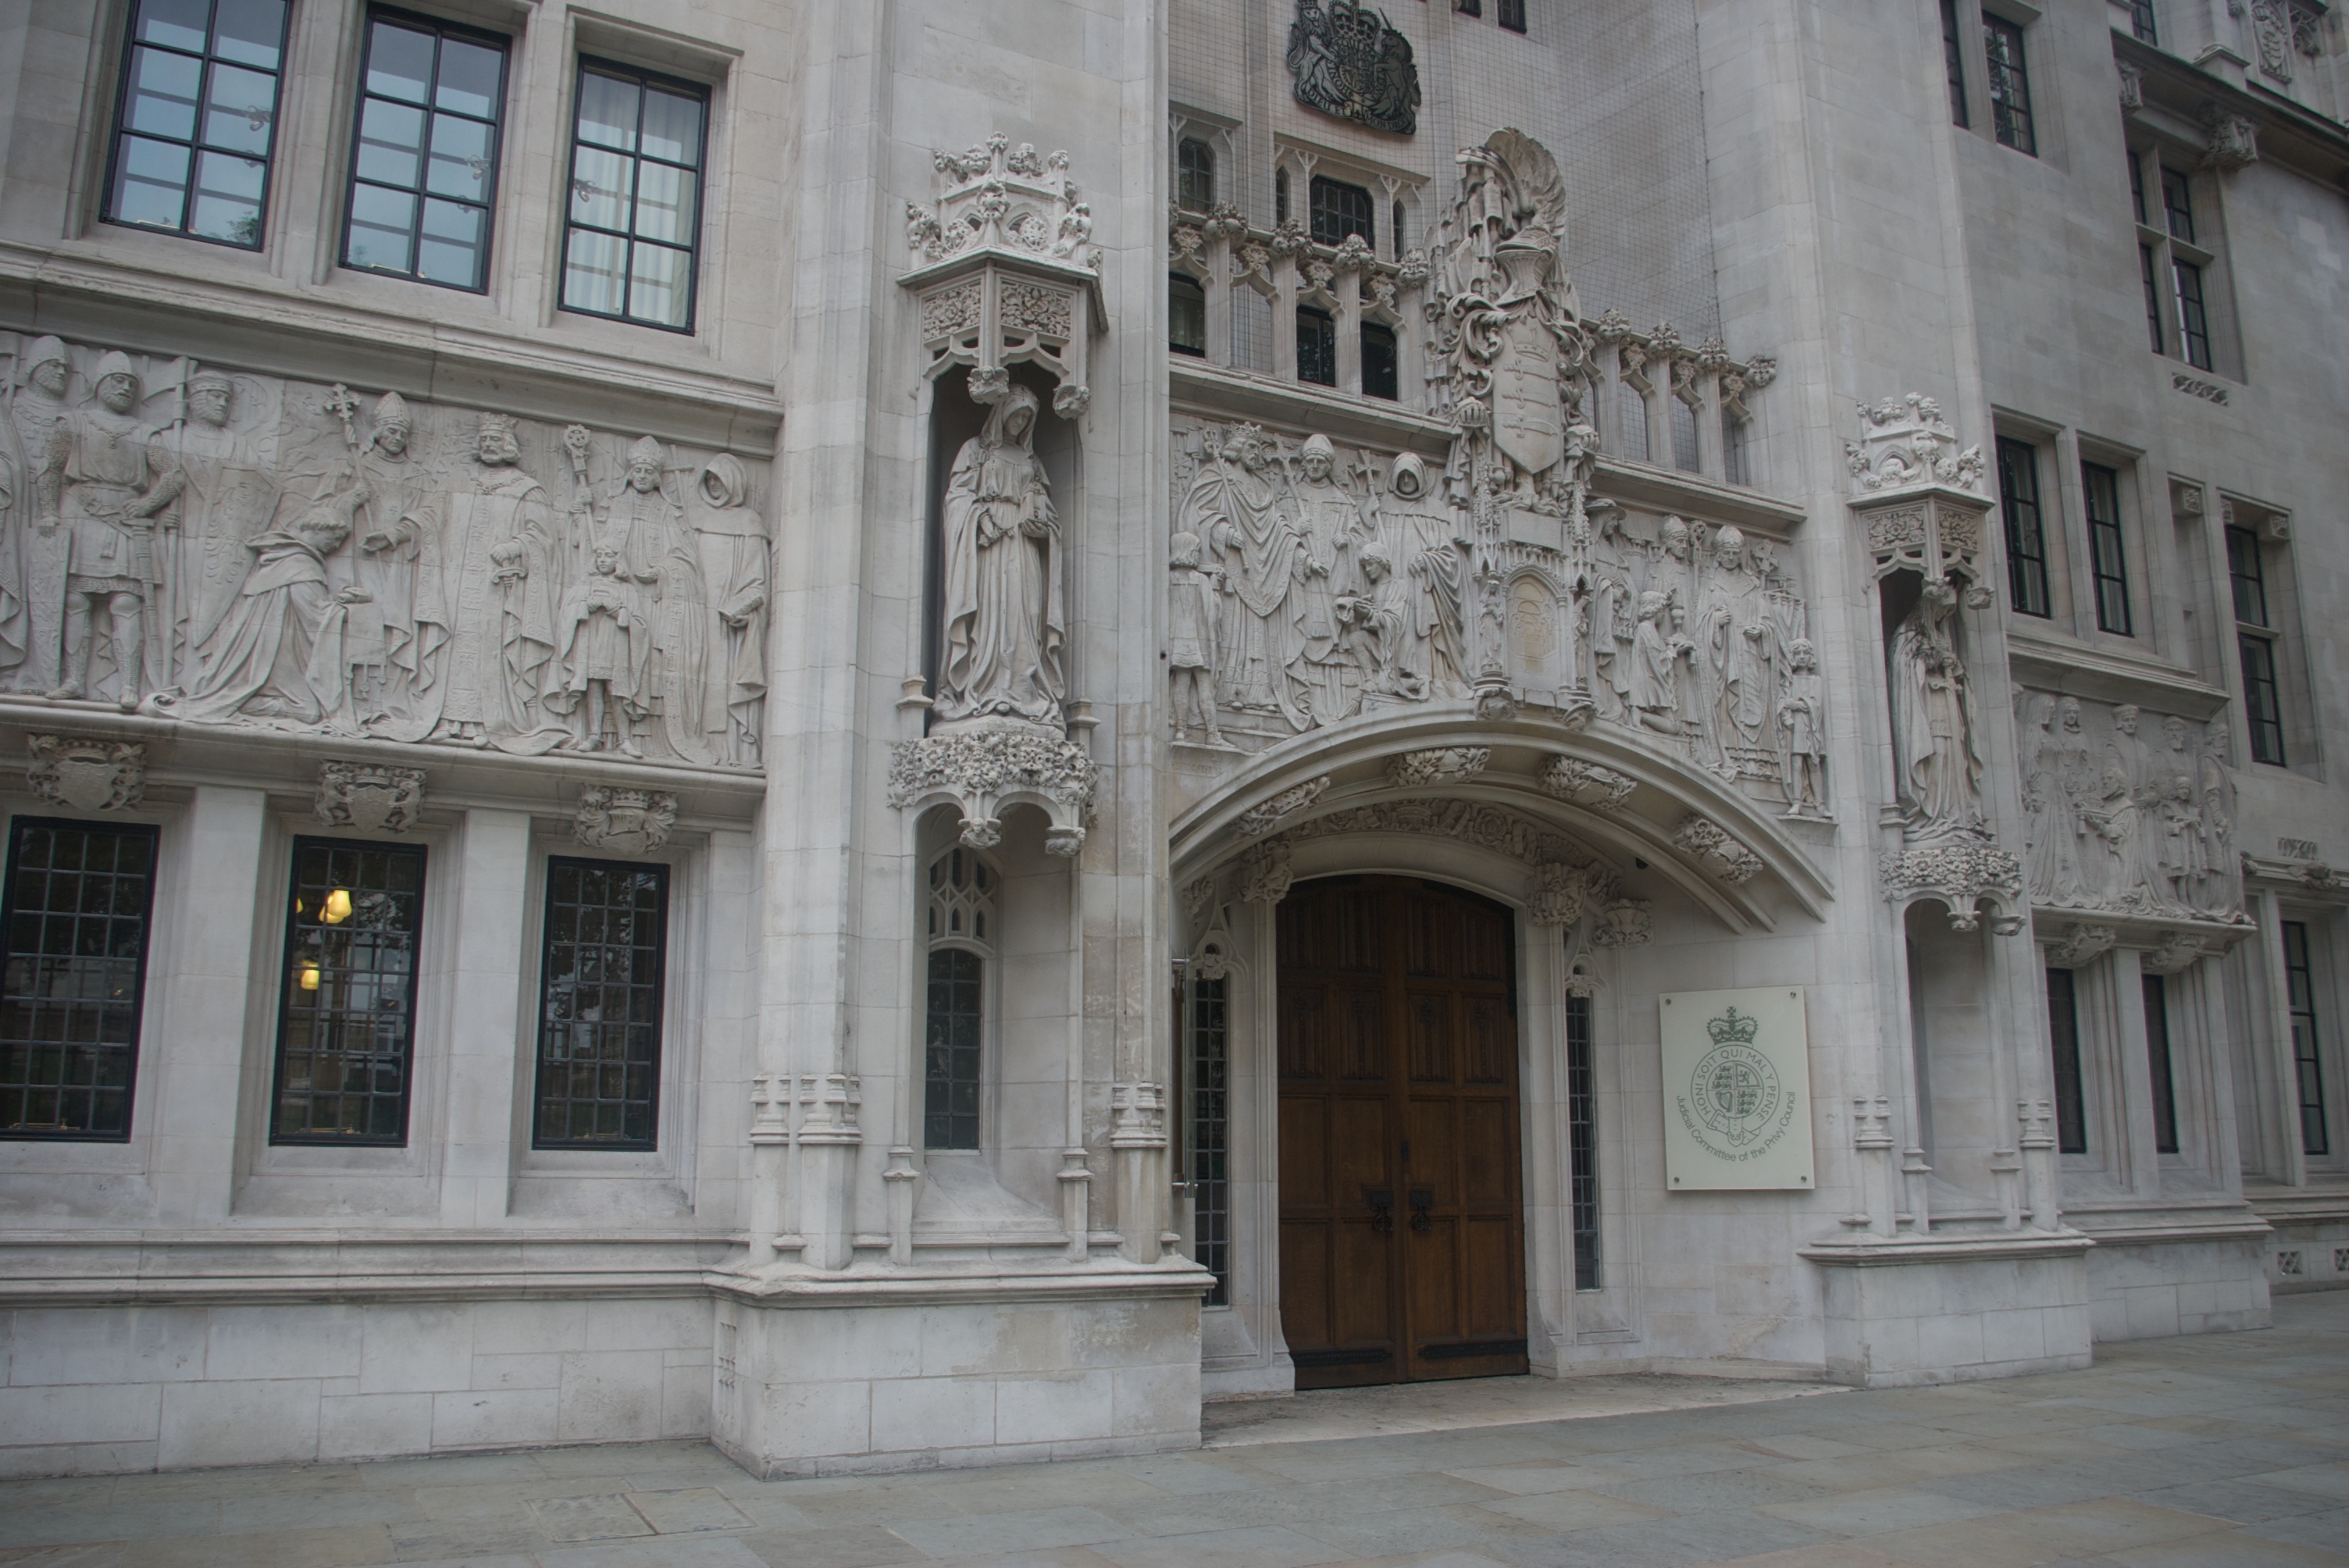 UK Supreme Court rules criminal suspect has reasonable expectation of privacy